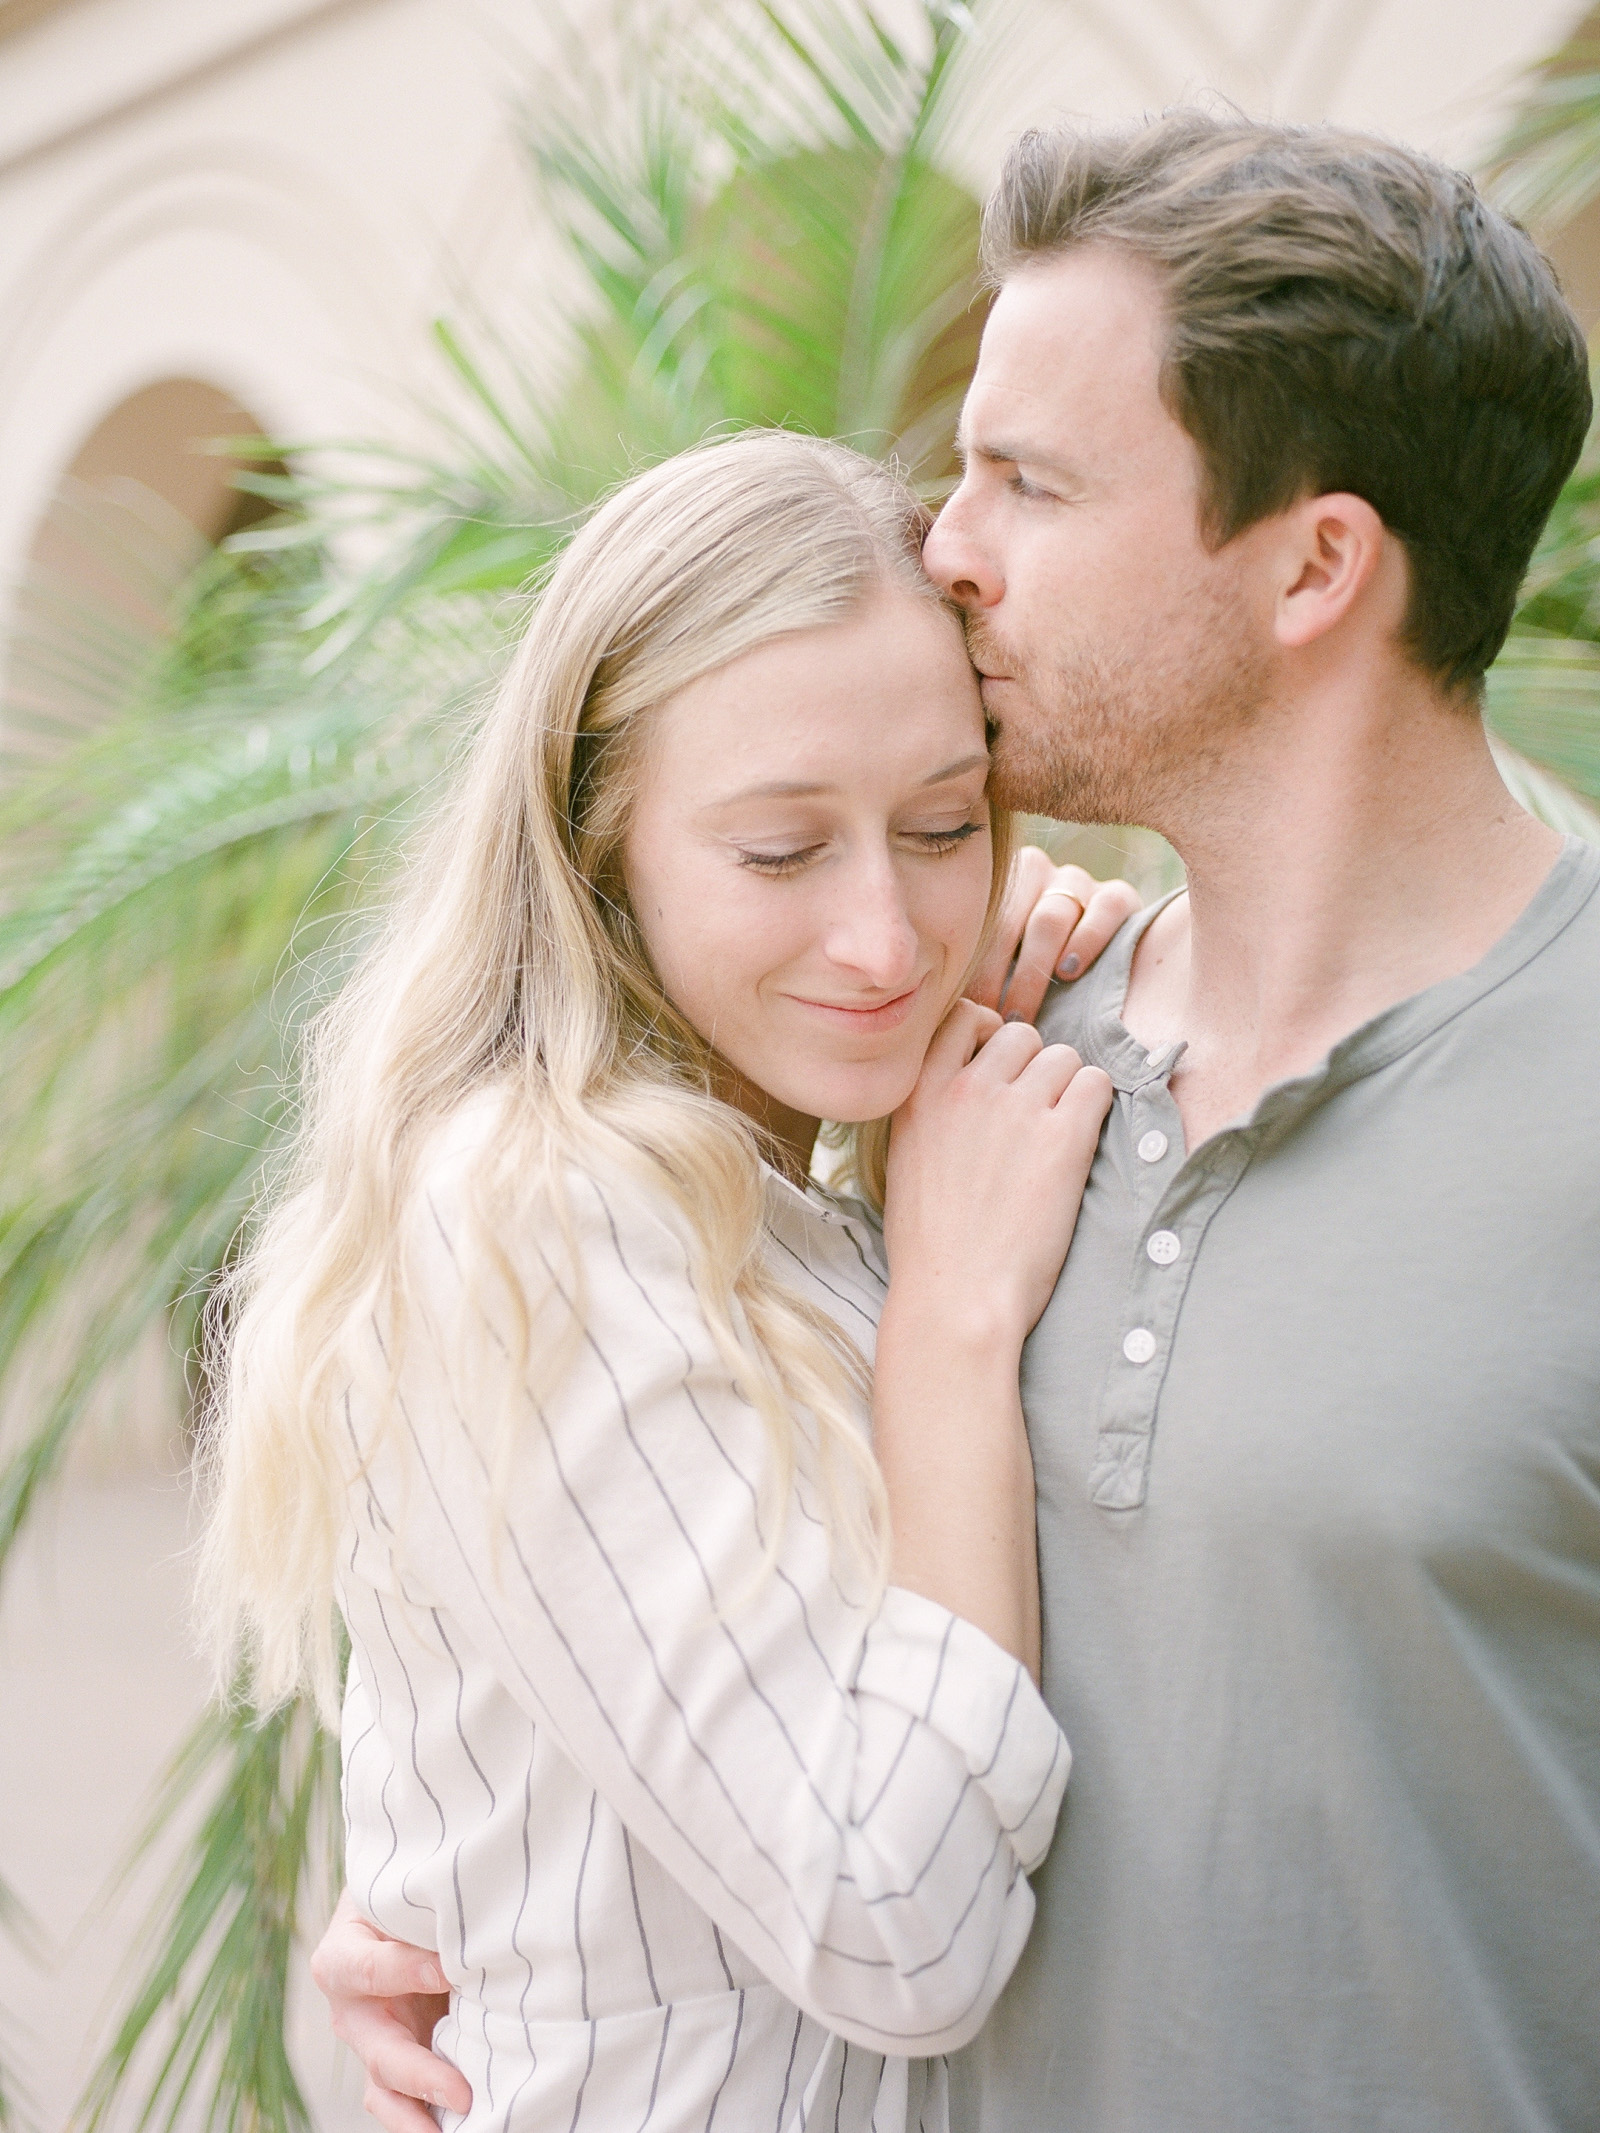 Balboa Park Engagement Session in San Diego - Kerry Jeanne film Photography (18)